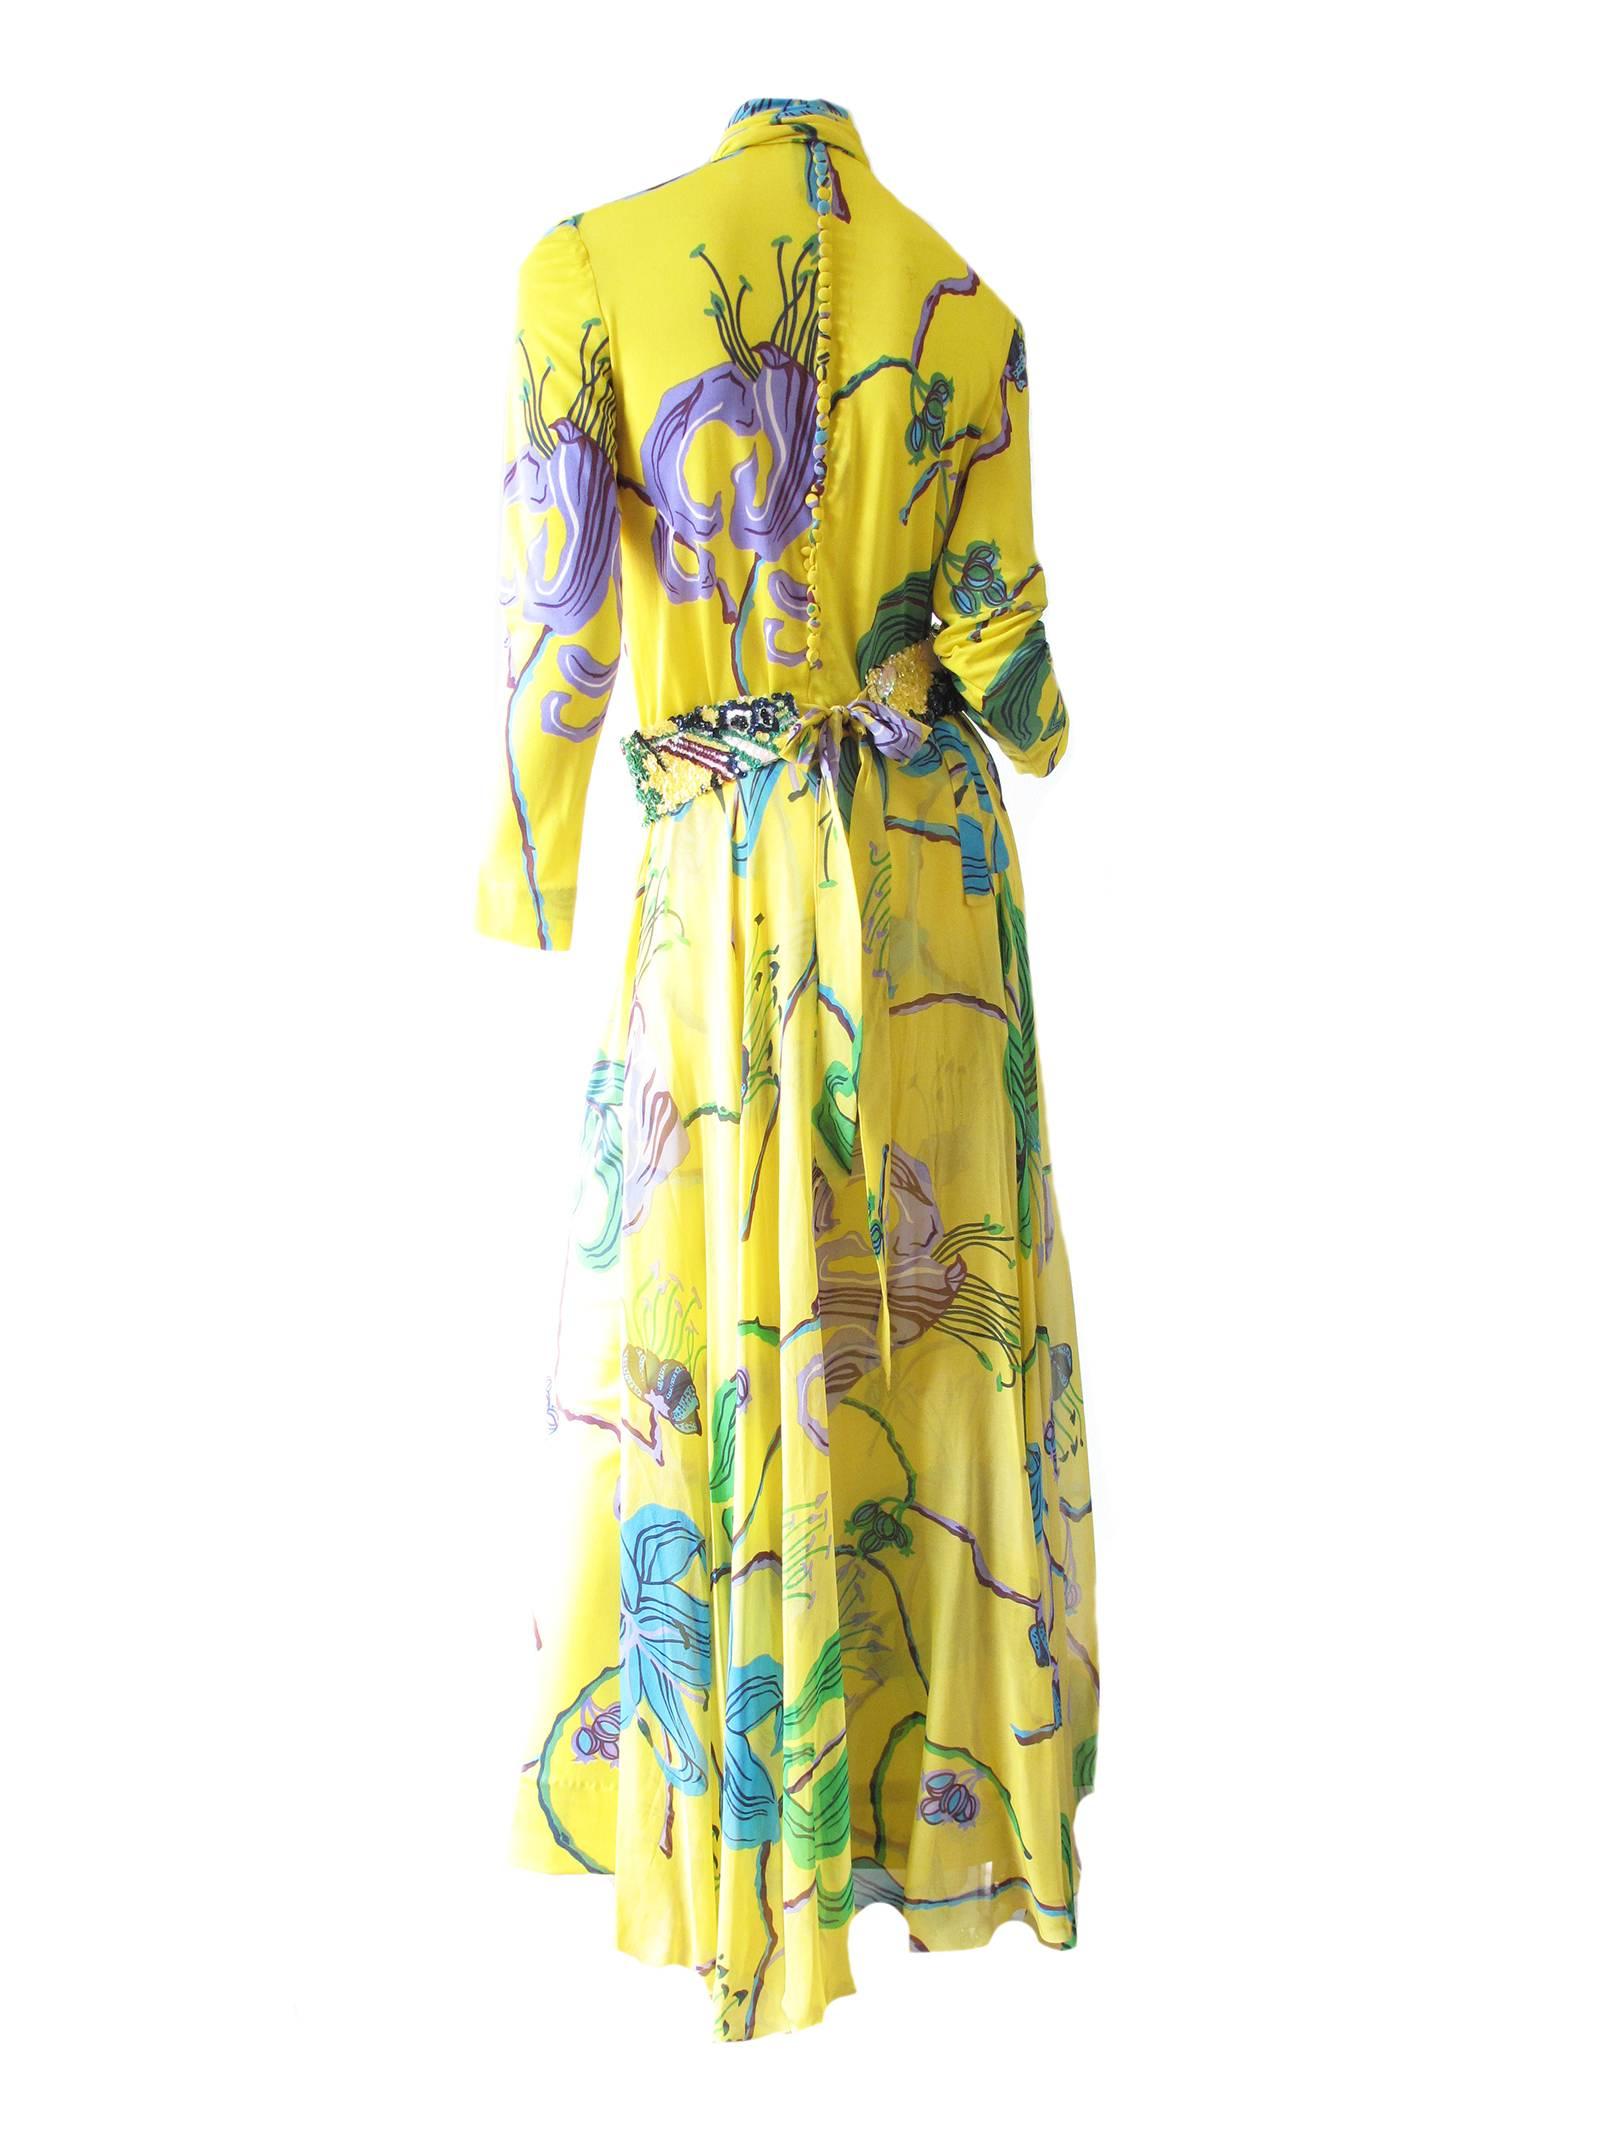 La Mendola Printed Gown with Over Skirt and Sequin Belt.  Floral pattern on yellow background in synthetic jersey. With a silk chiffon over skirt. The dress closes in the back with 40 small covered buttons.  Comes with sequin tie belt and fabric tie